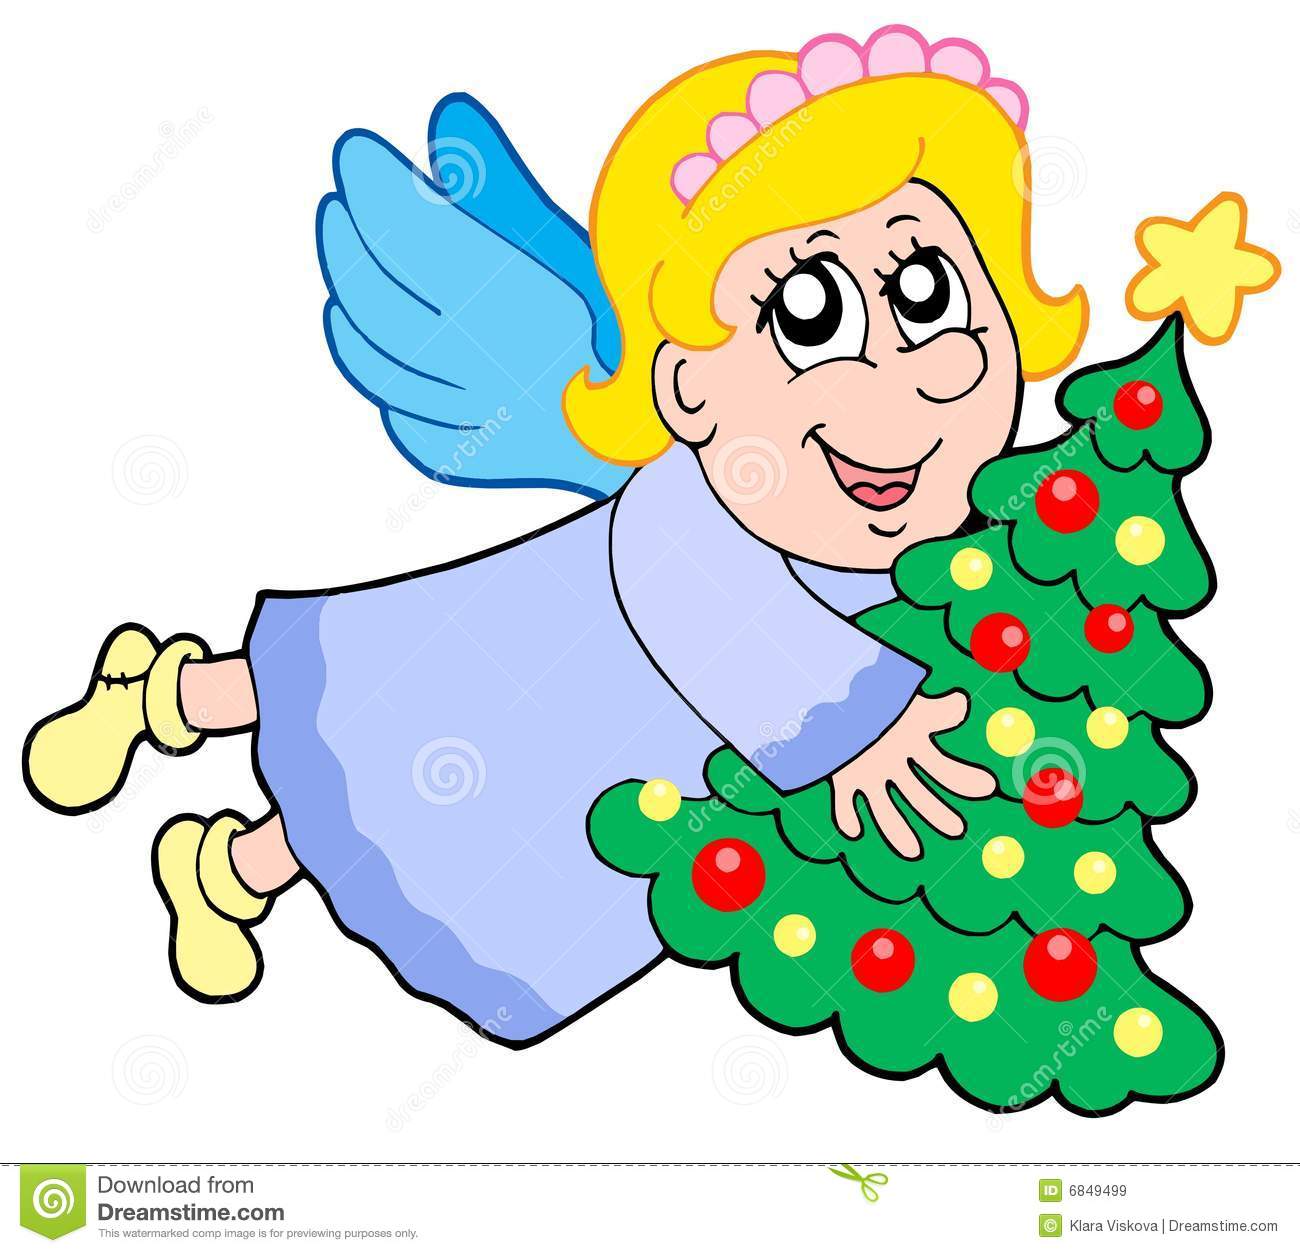 Cute Angel With Christmas Tree Royalty Free Stock Images   Image